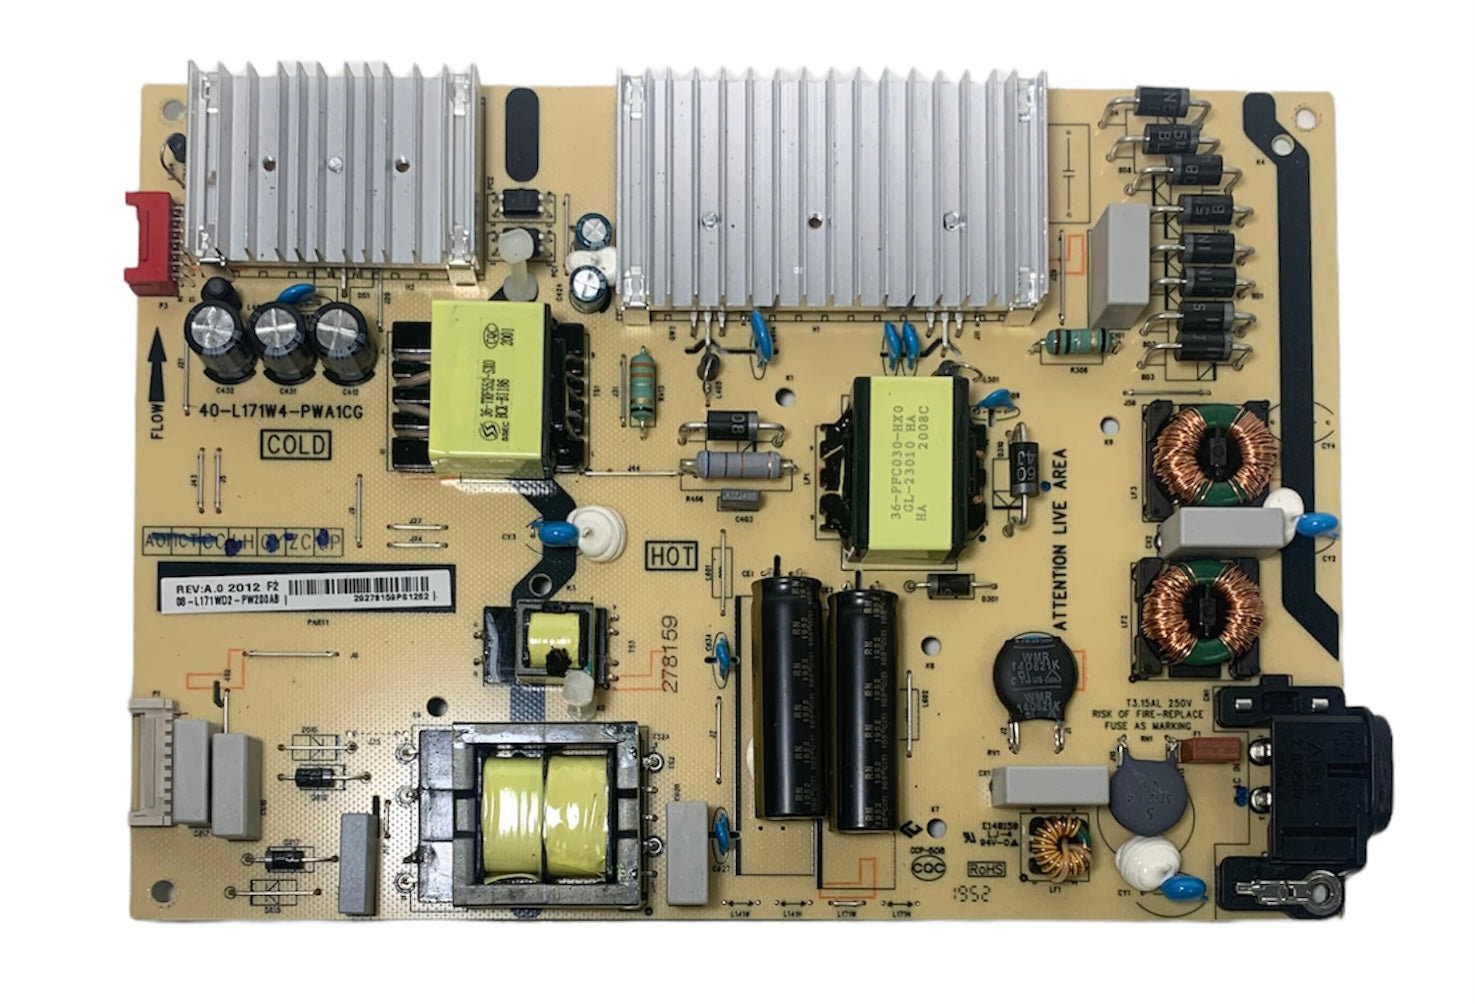 TCL 08-L171WD2-PW200AB Power Supply Board